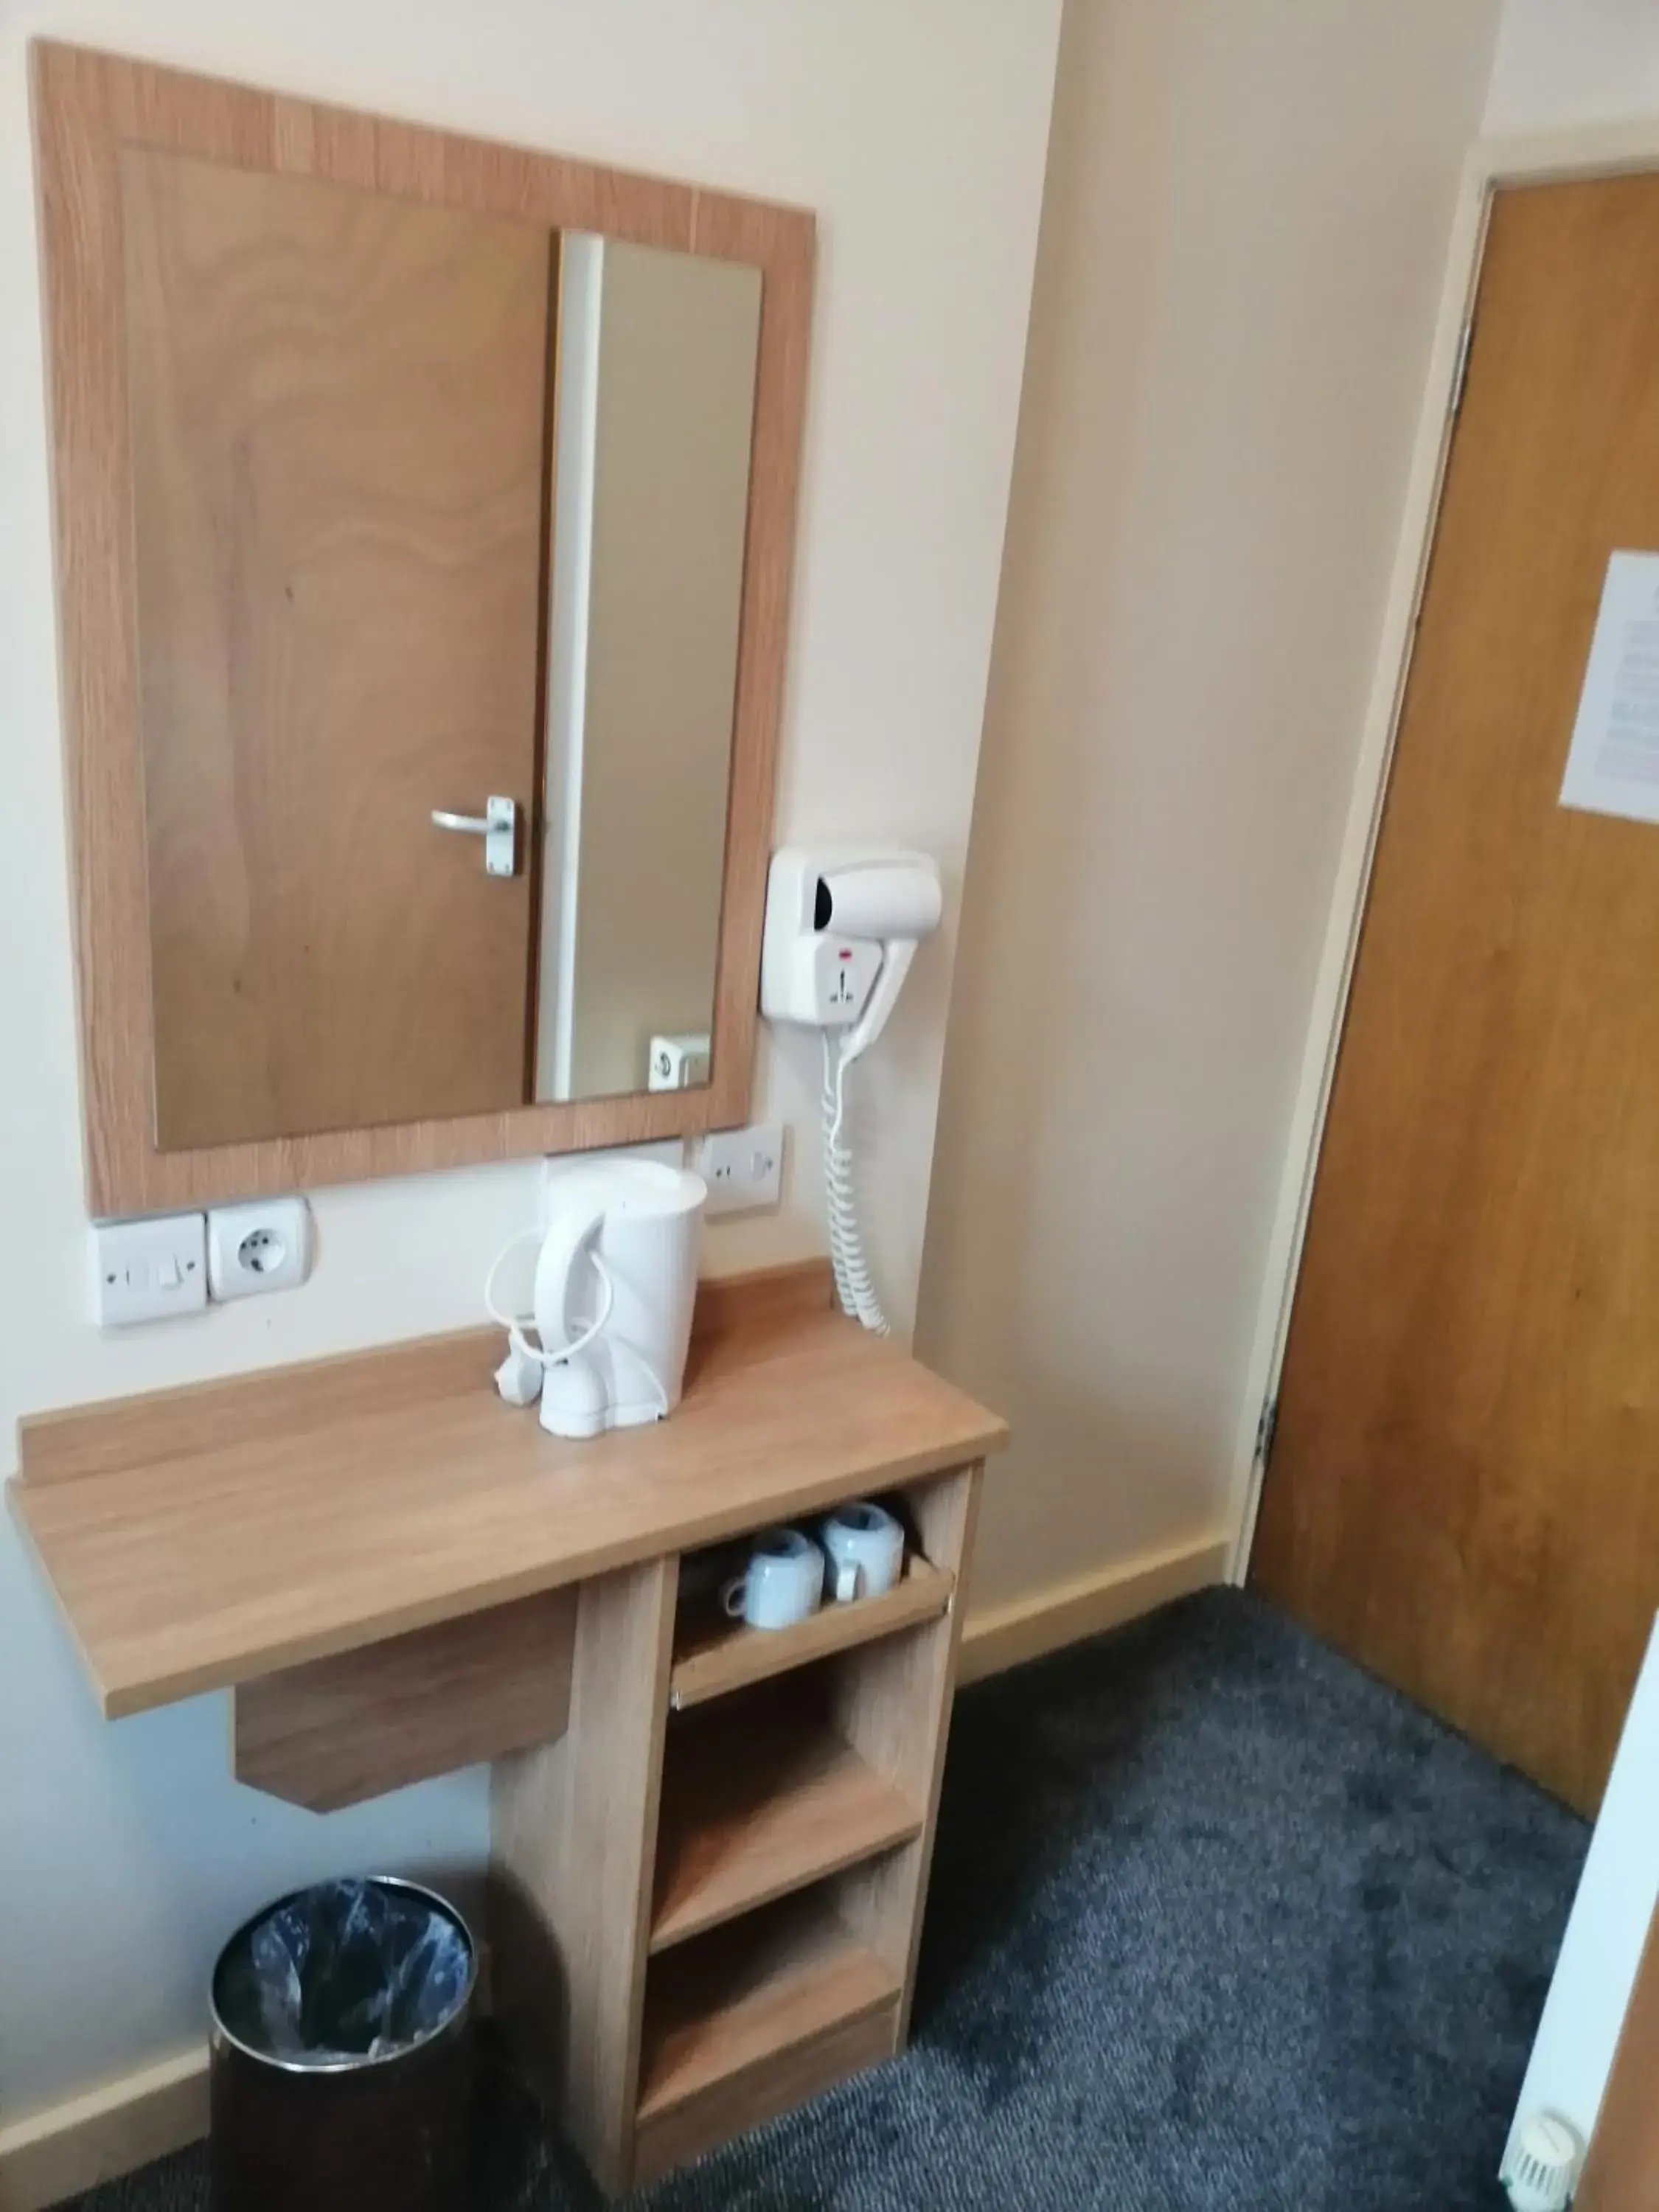 Area and facilities, Bathroom in Colliers Hotel